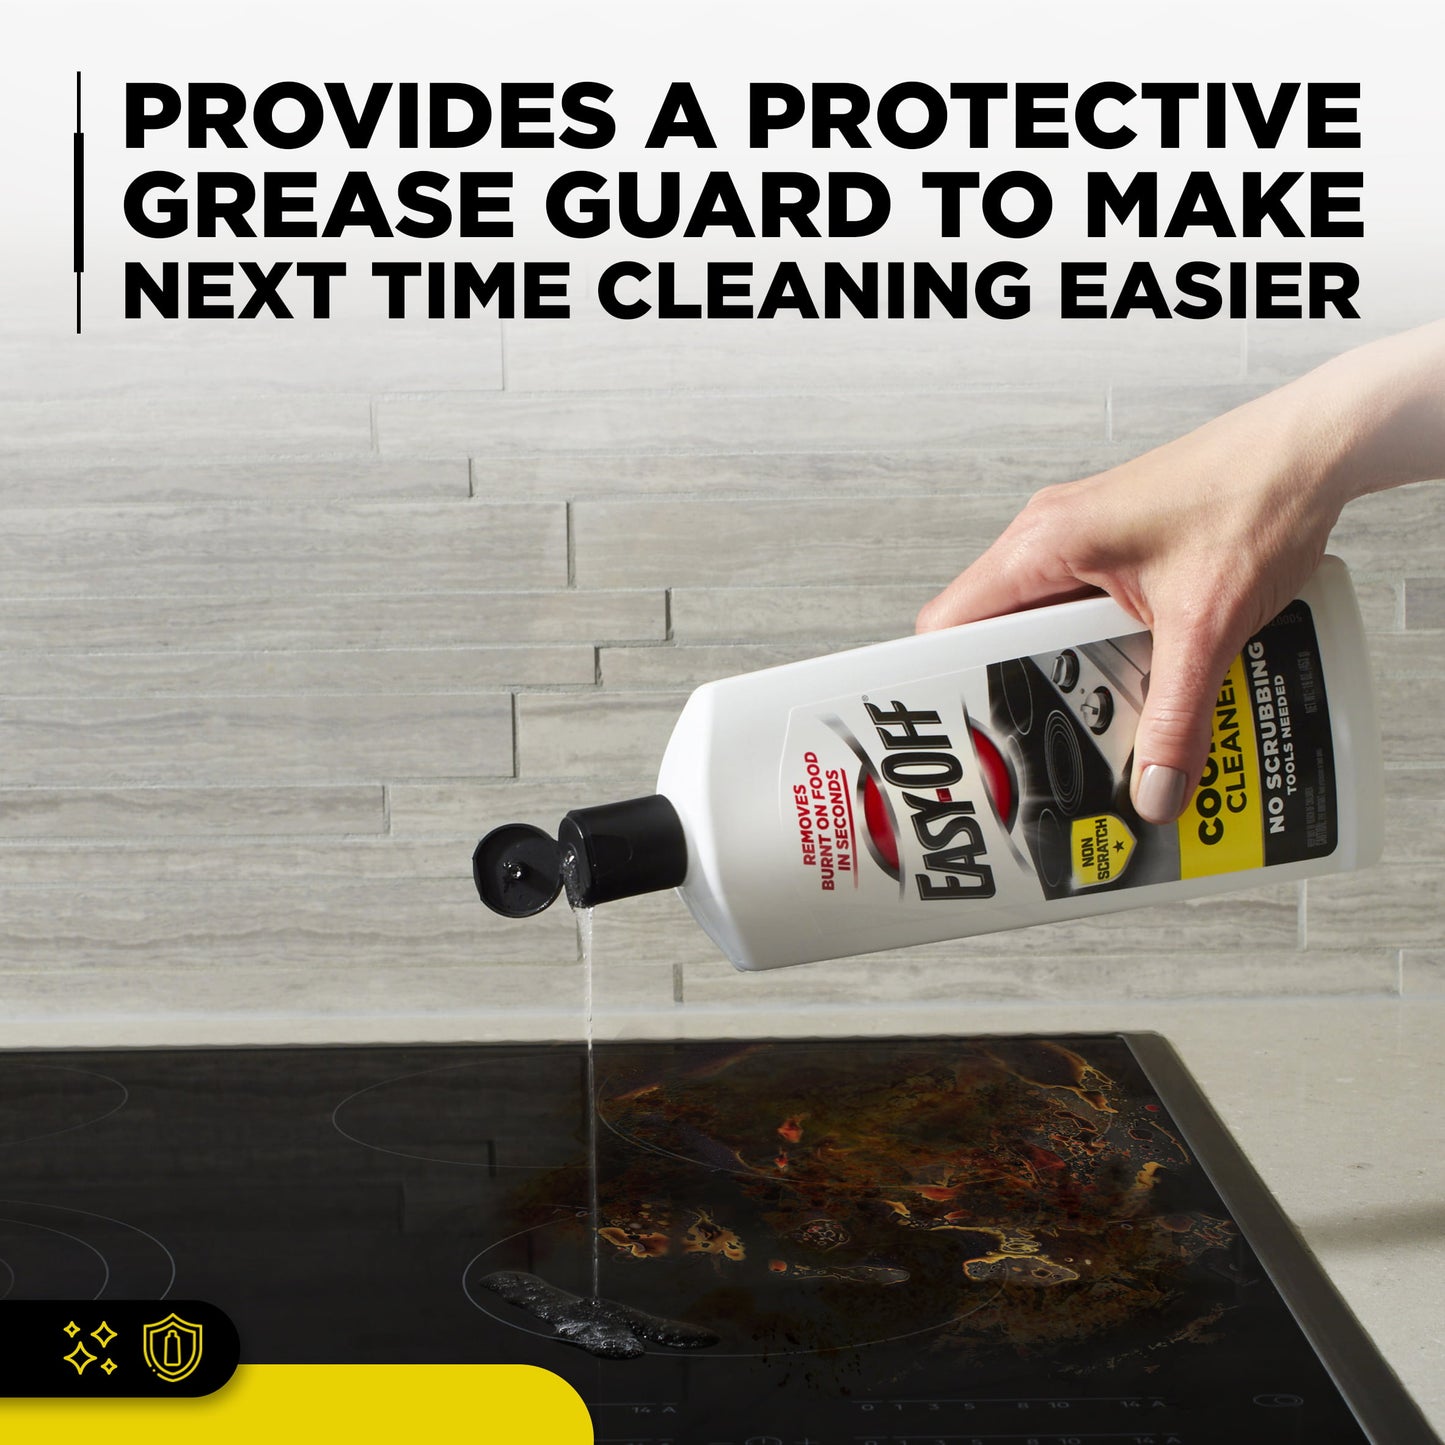 Easy Off Heavy Duty Cooktop Cleaner, Removes Burnt on Food in Seconds, Non-Scratch, No Scrubbing Tools Needed, 16 Oz